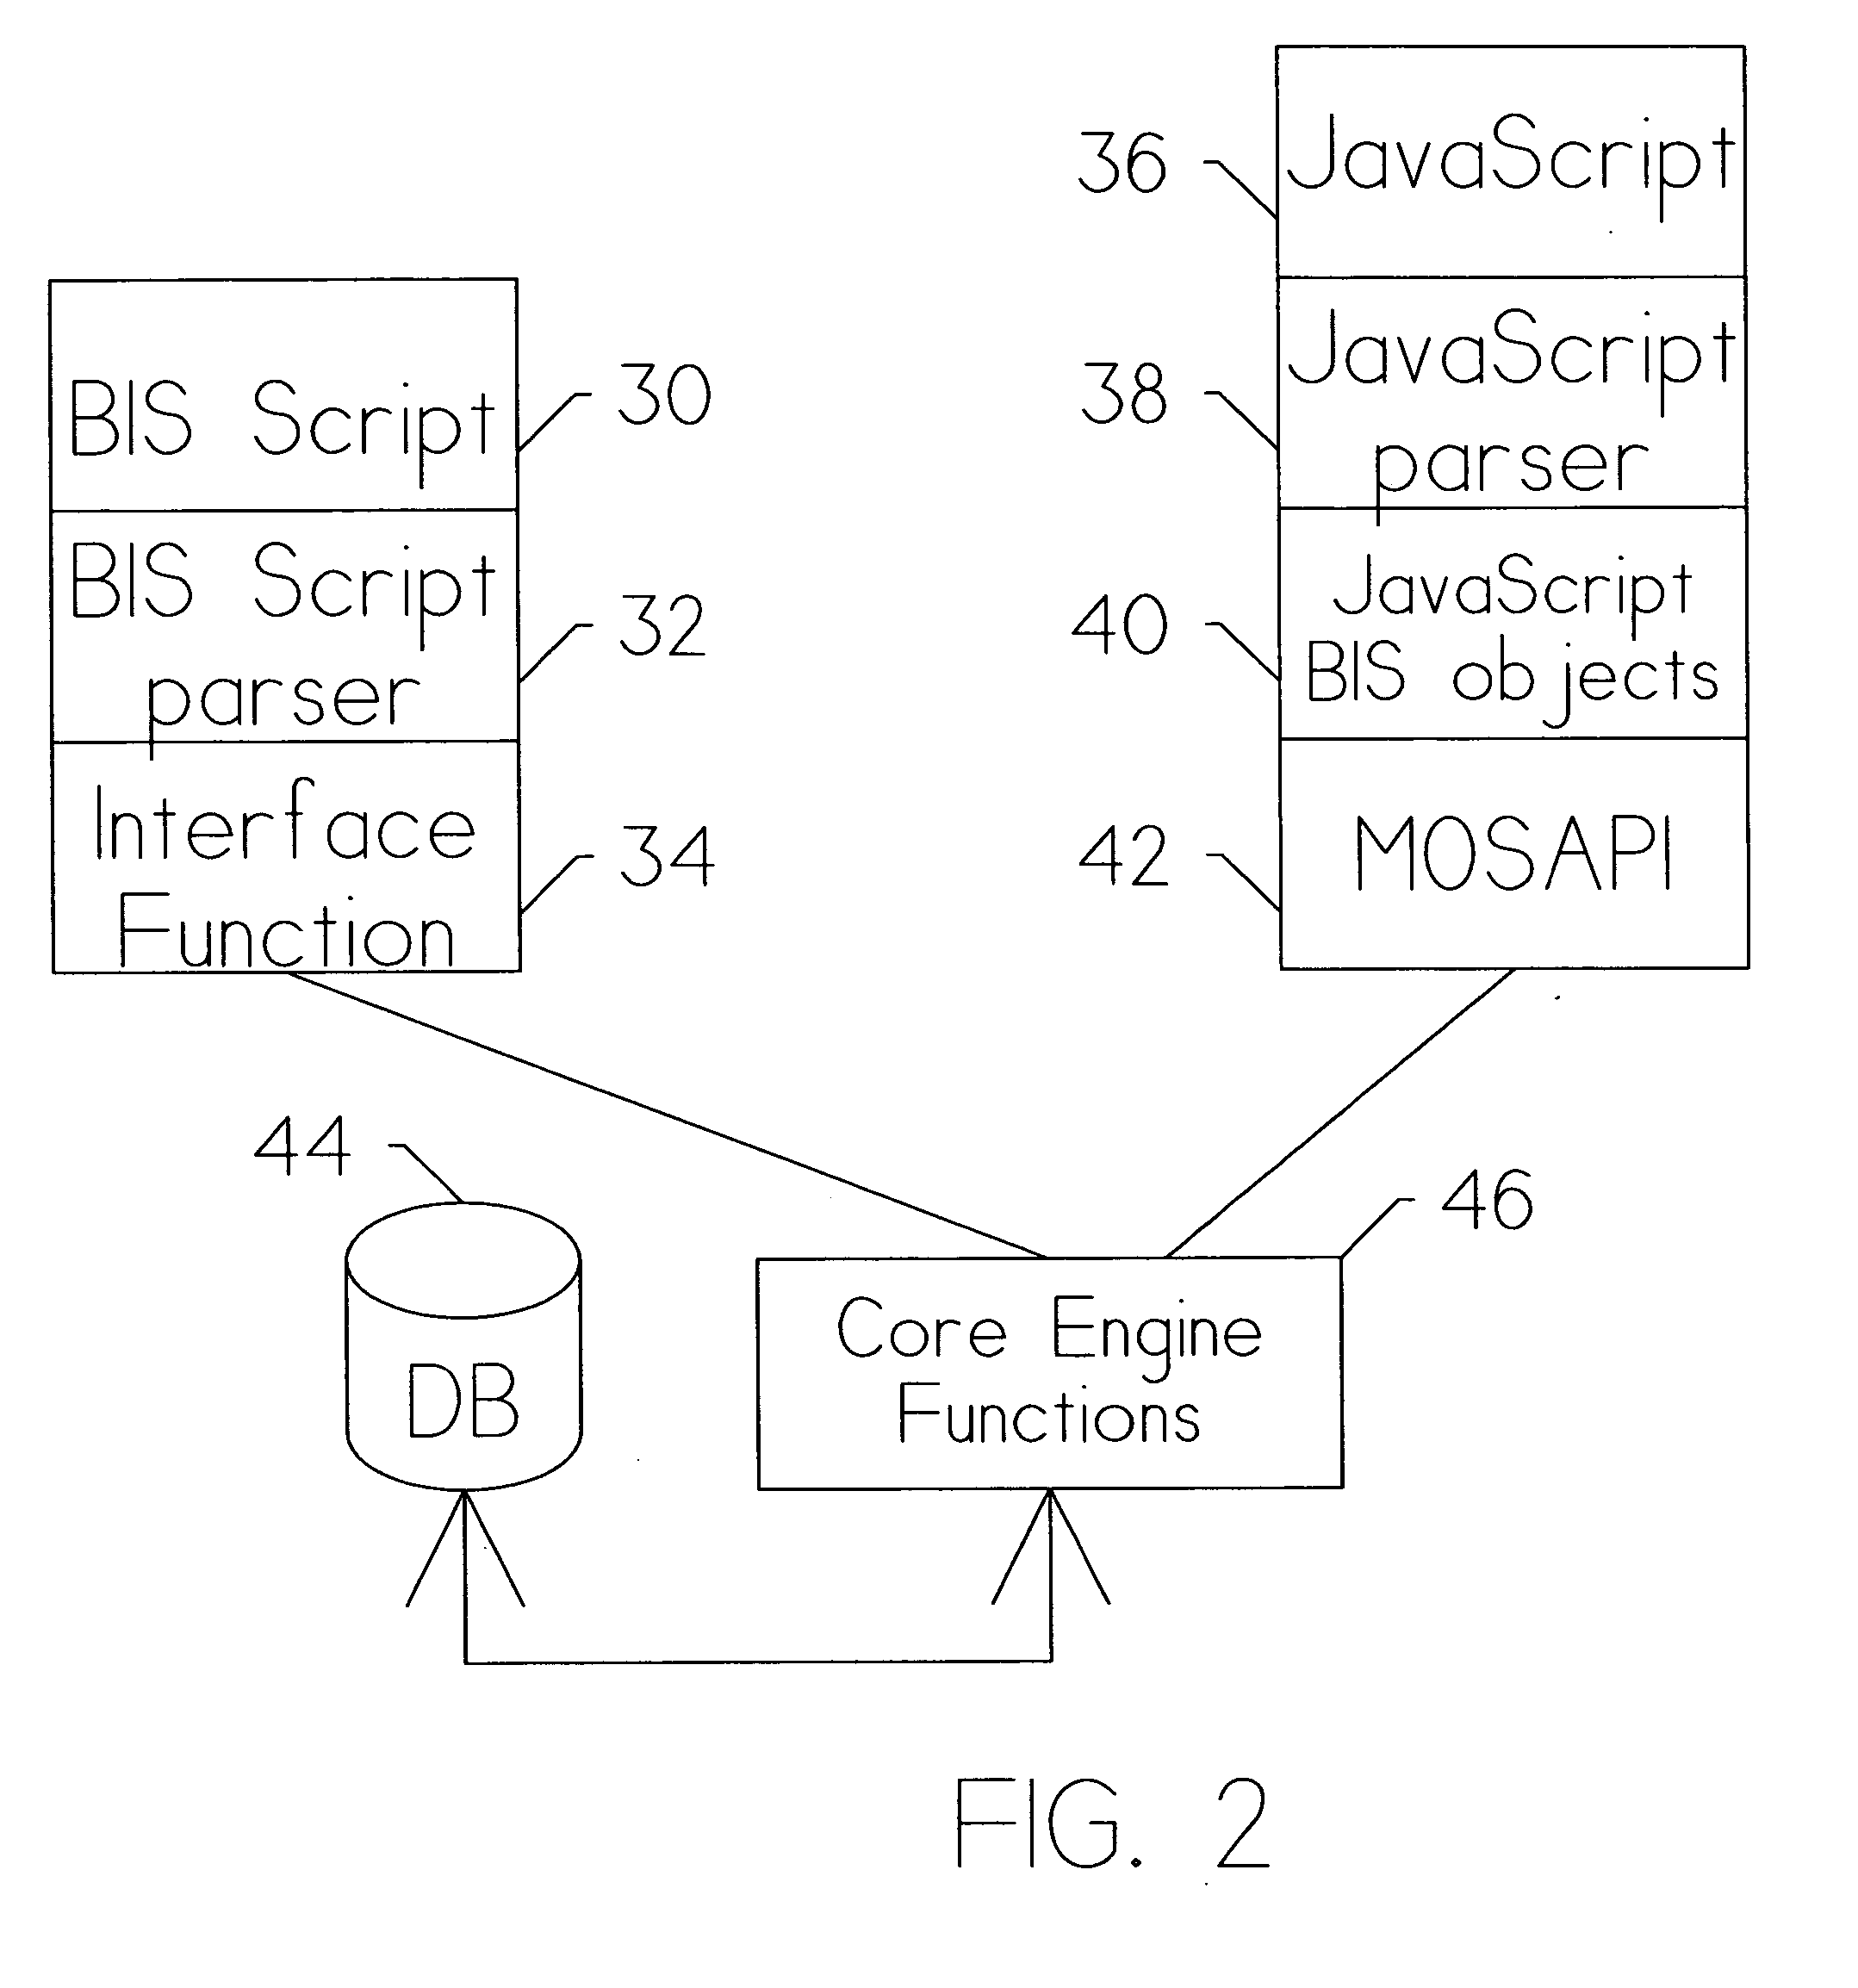 Method and apparatus for combining of information across multiple datasets in a JavaScript environment